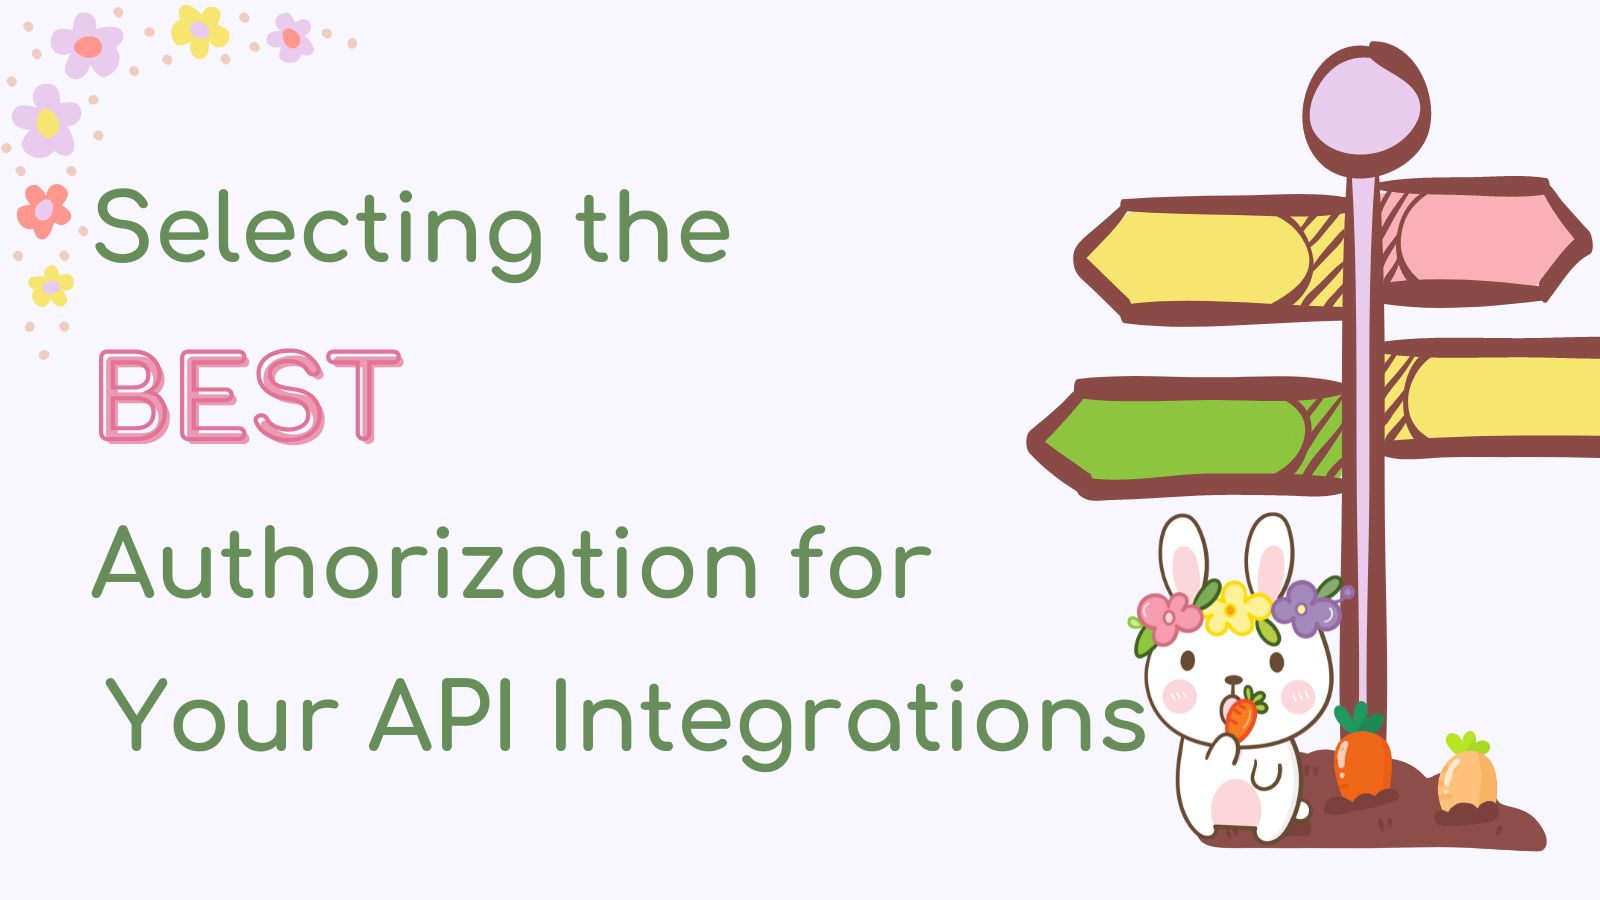 Selecting the Best Authorization for Your API Integrations